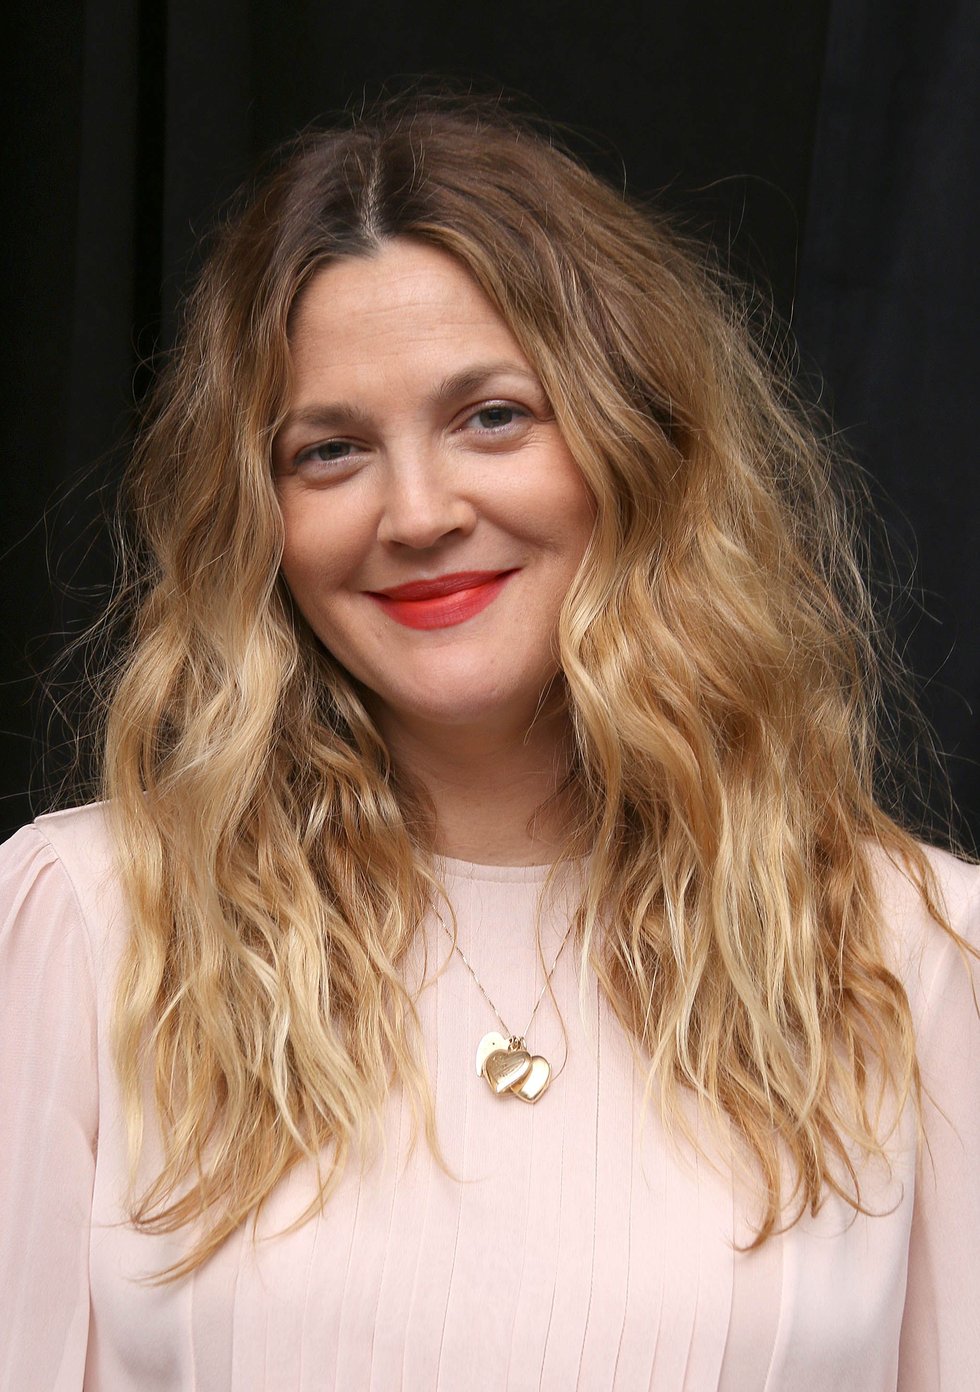 Drew Barrymore shares a powerful message about her sobriety